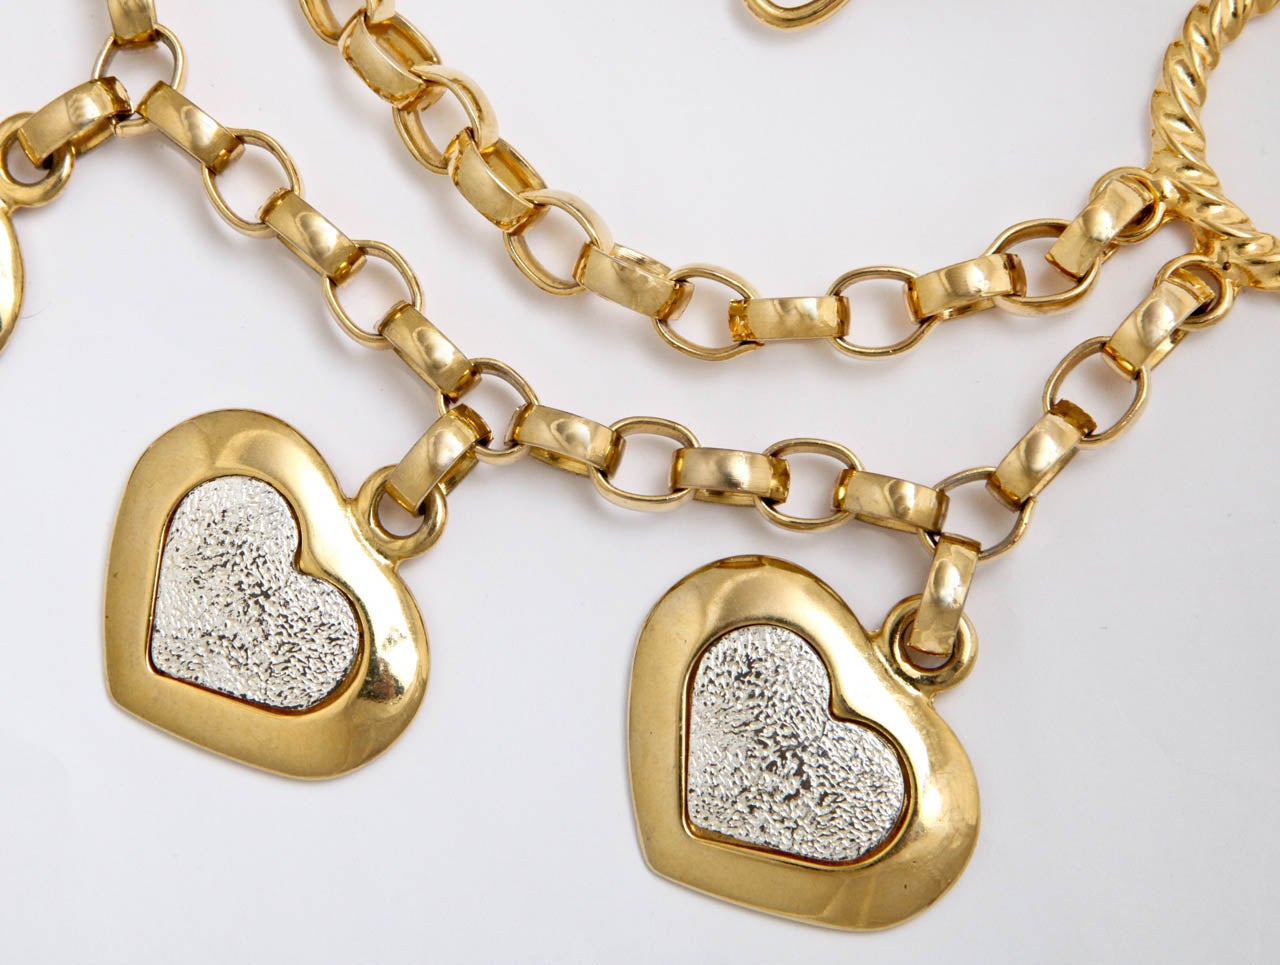 Italian Goldtone Heart Belt, Costume Jewelry In Excellent Condition For Sale In Stamford, CT